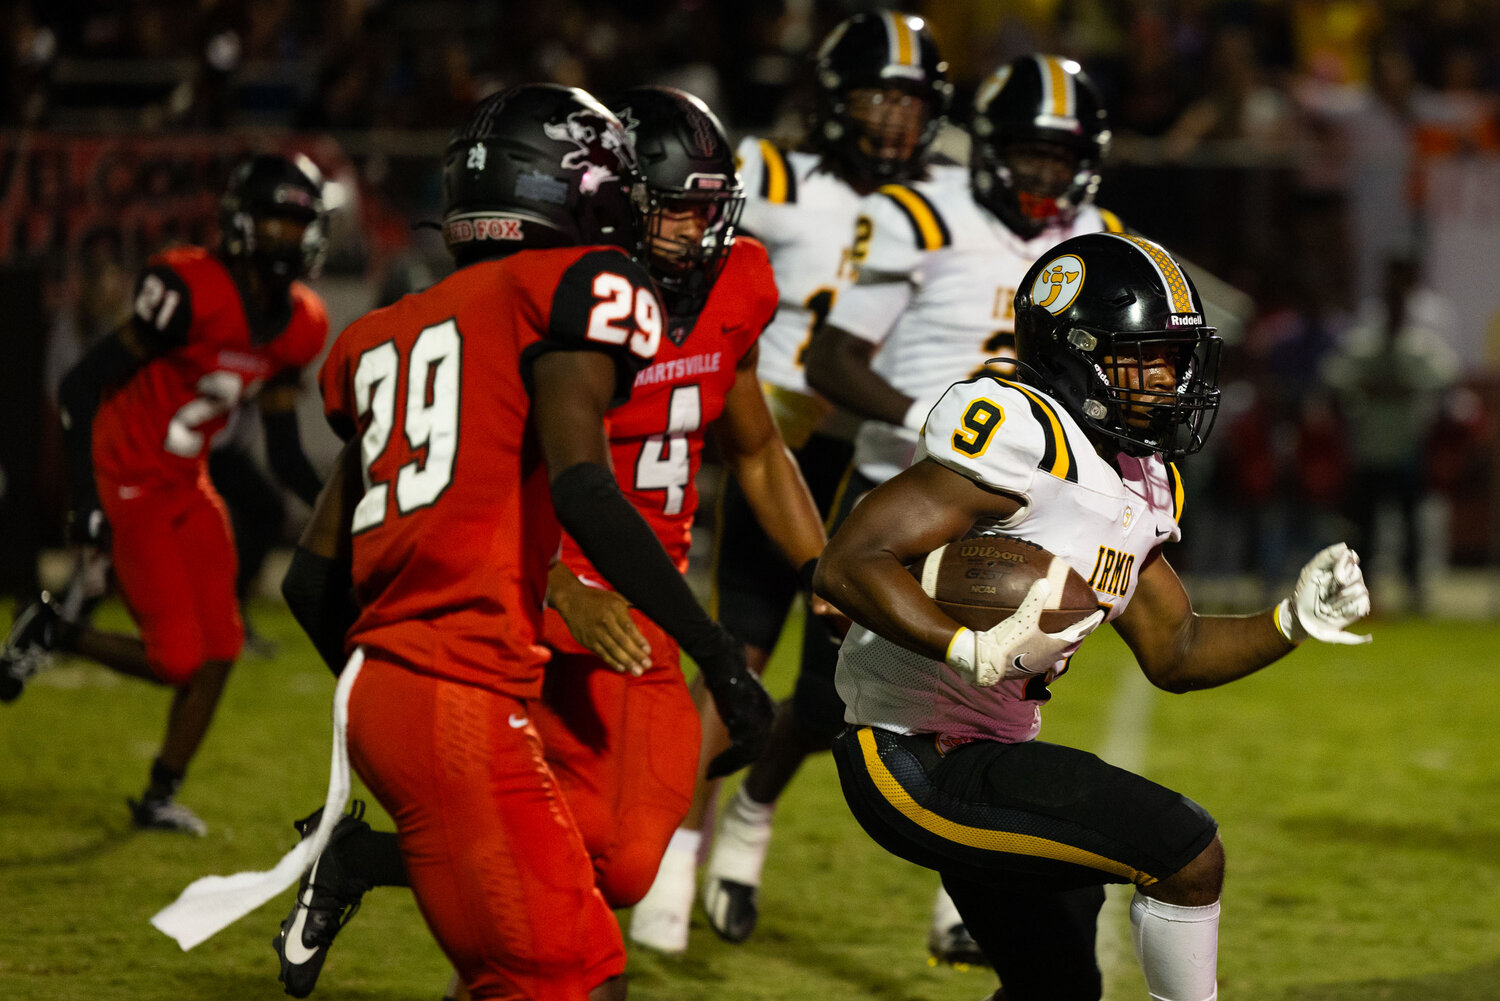 Irmo wide receiver Telvin Smith runs the ball down the field in the first quarter.